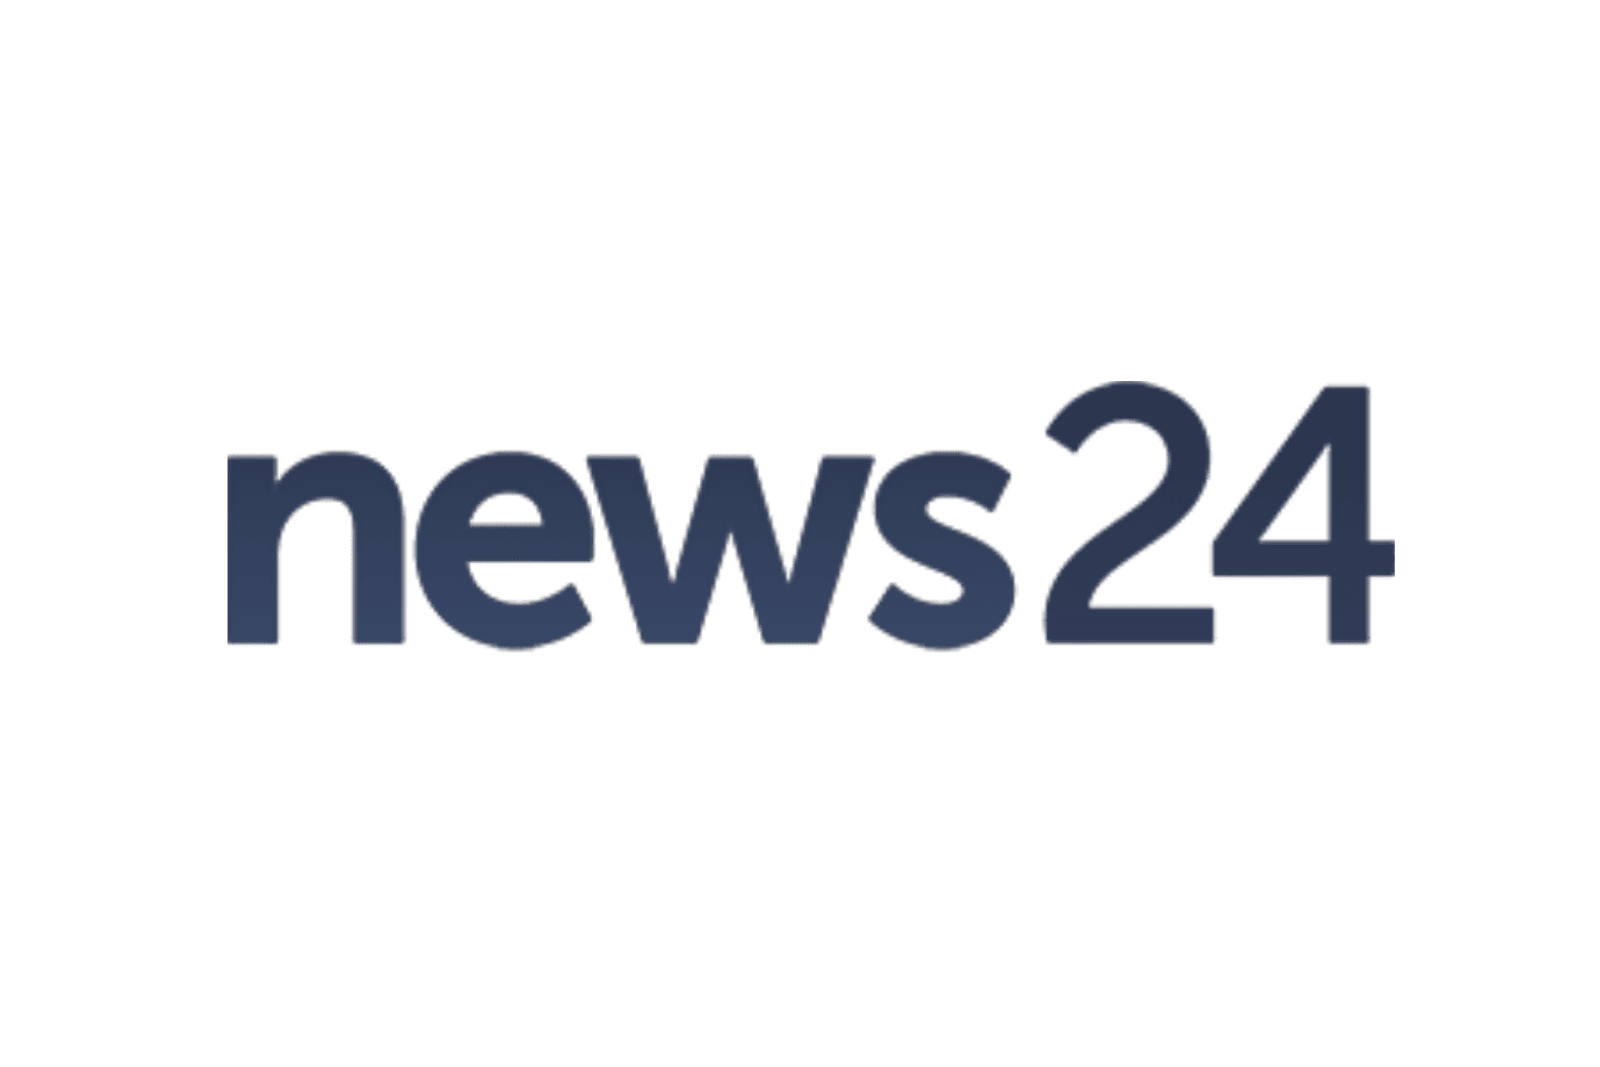 The Secret Love Project Charity featured in News24